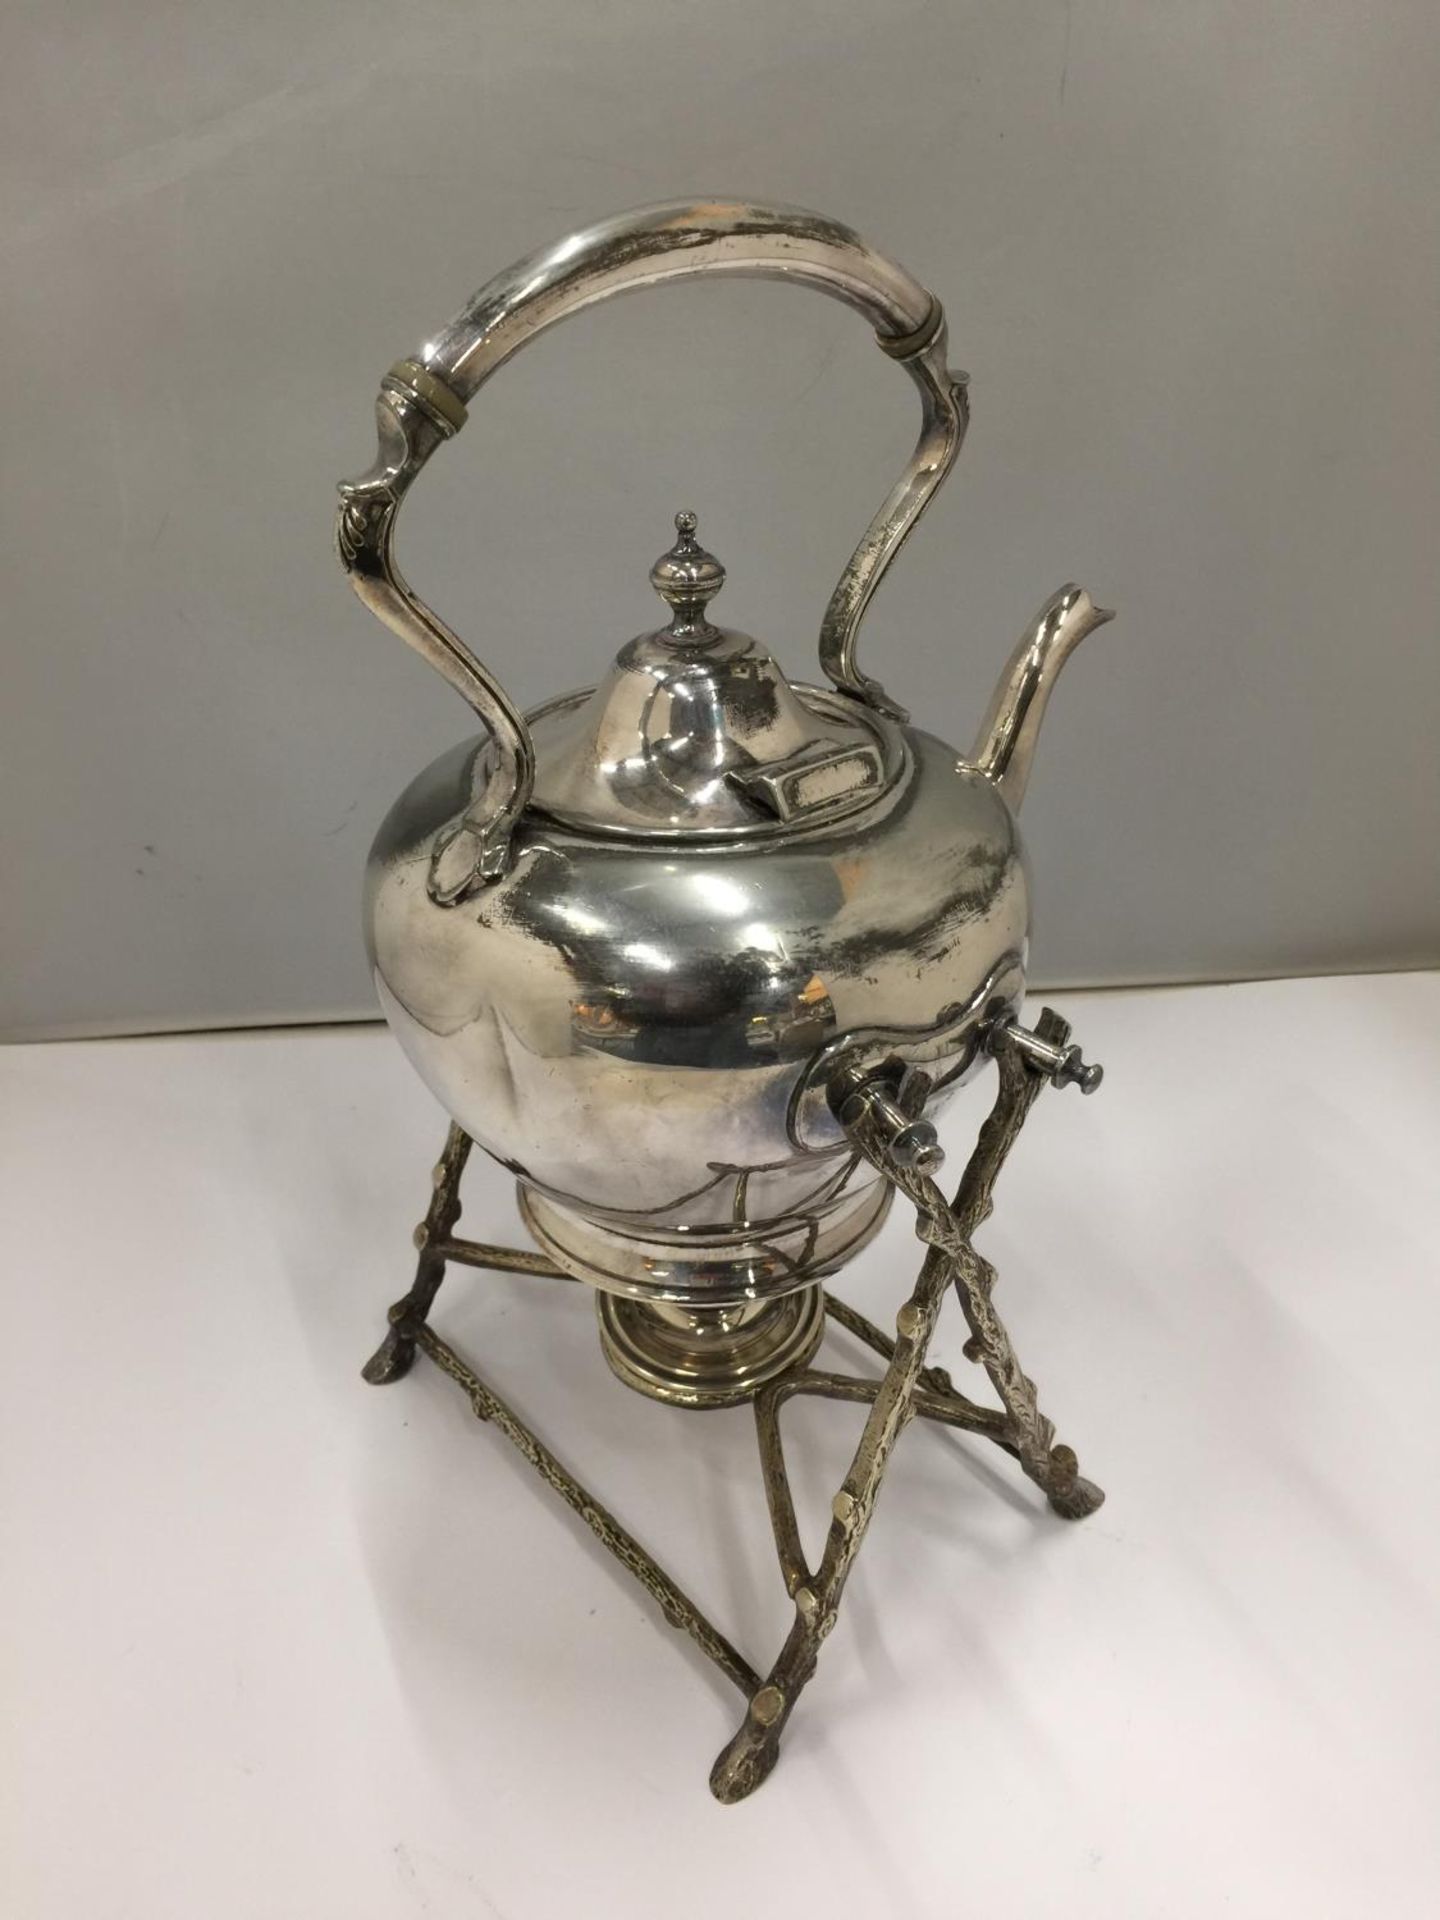 A SILVER PLATED KETTLE ON A STAND WITH SPIRIT BURNER - Image 4 of 5